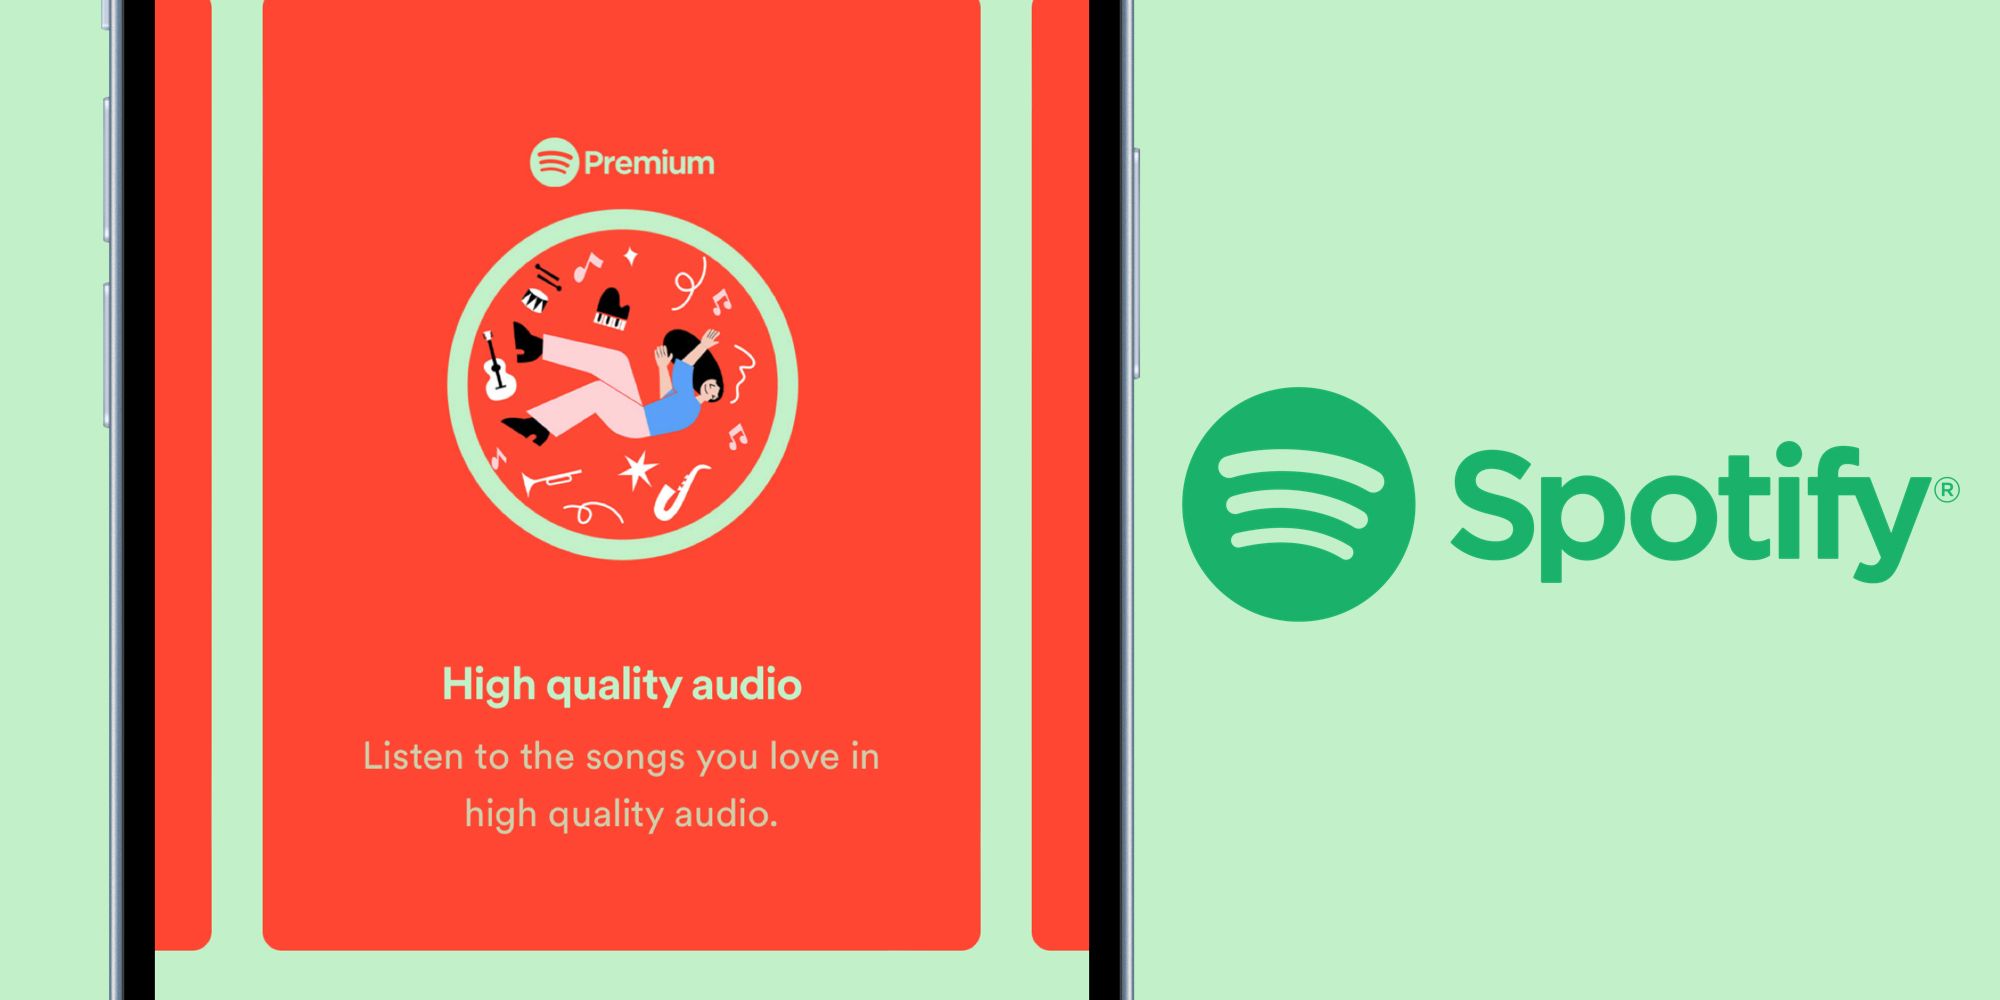 Spotify High Quality Audio banner next to the Spotify logo